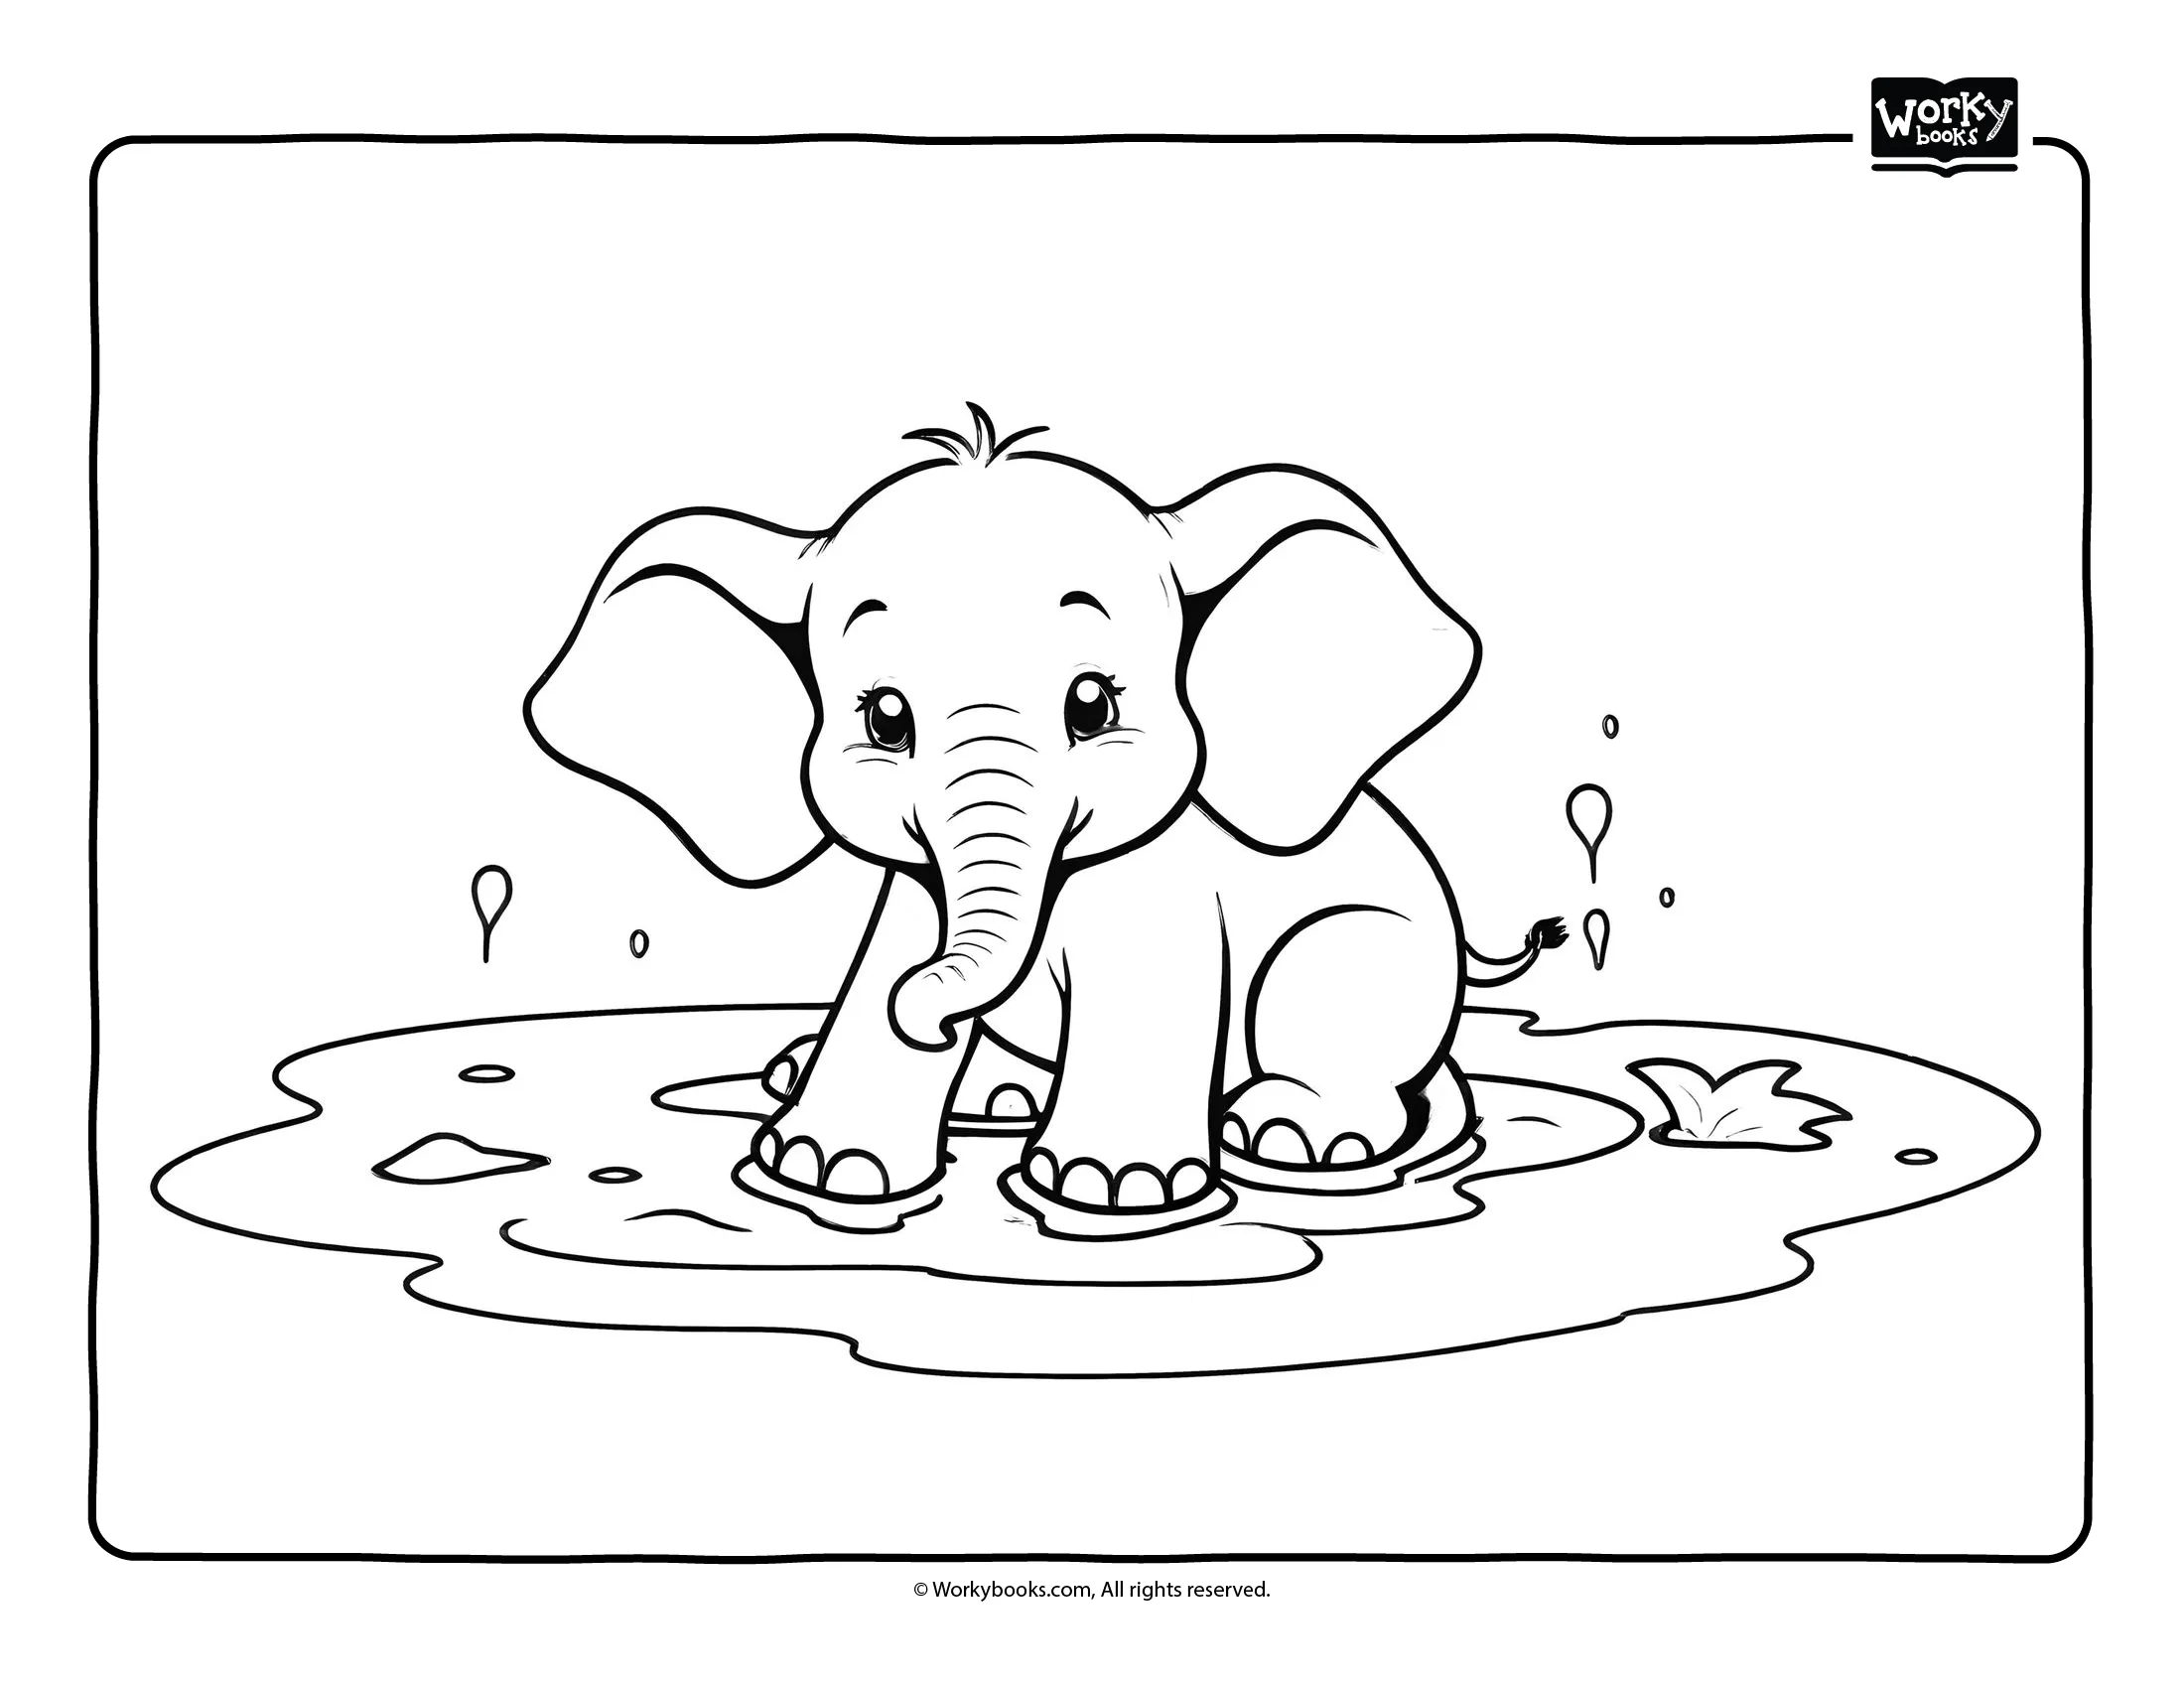 Elephant Cooling Off Mud coloring page